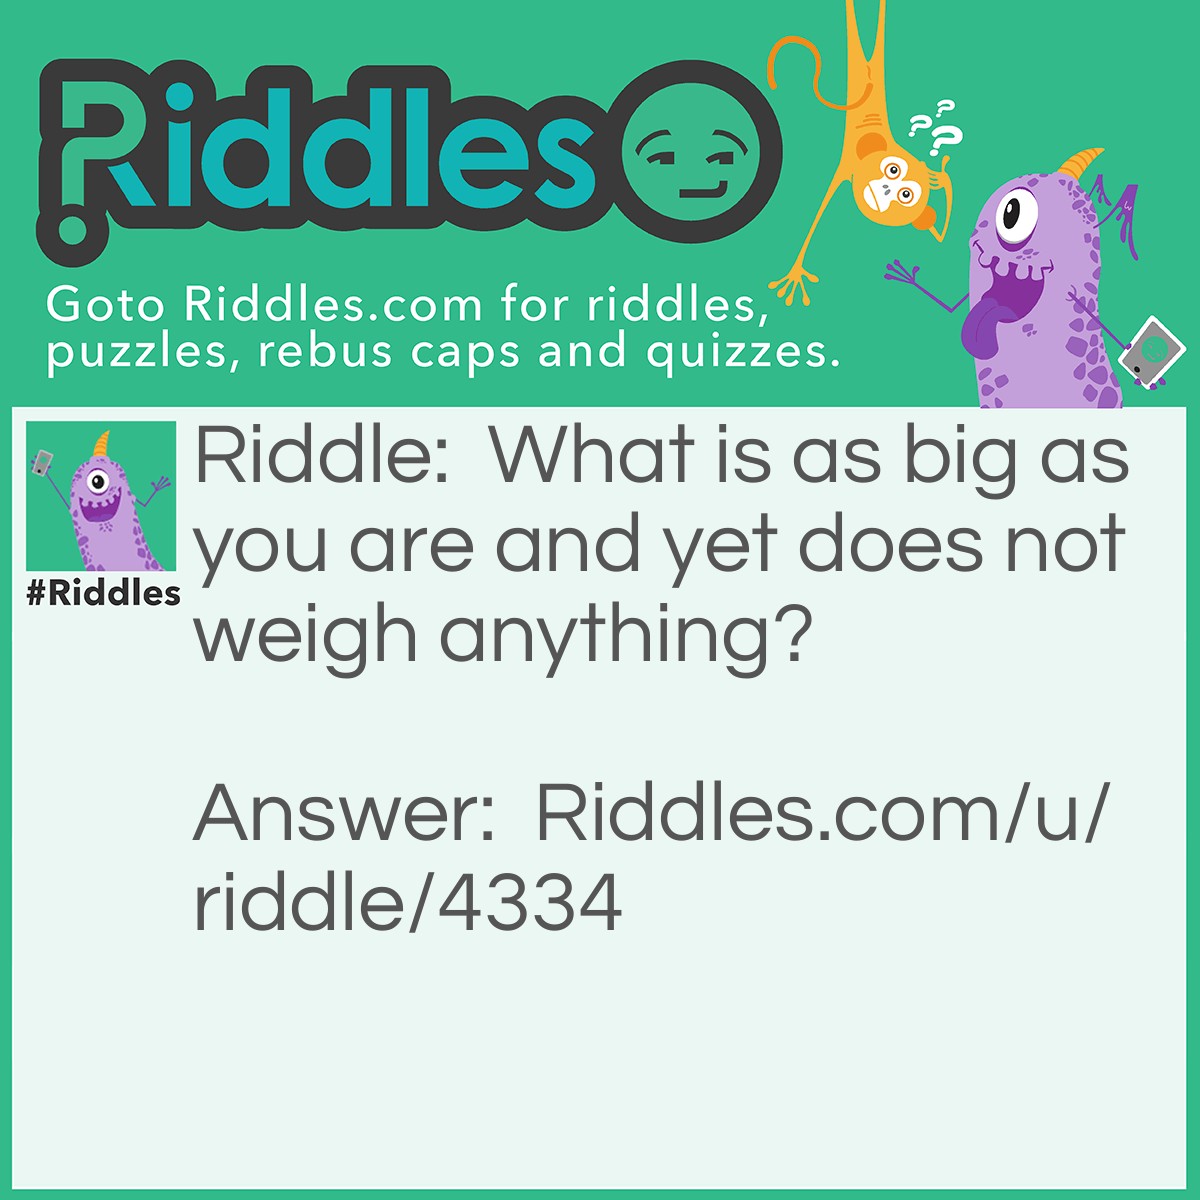 Riddle: What is as big as you are and yet does not weigh anything? Answer: Your shadow.